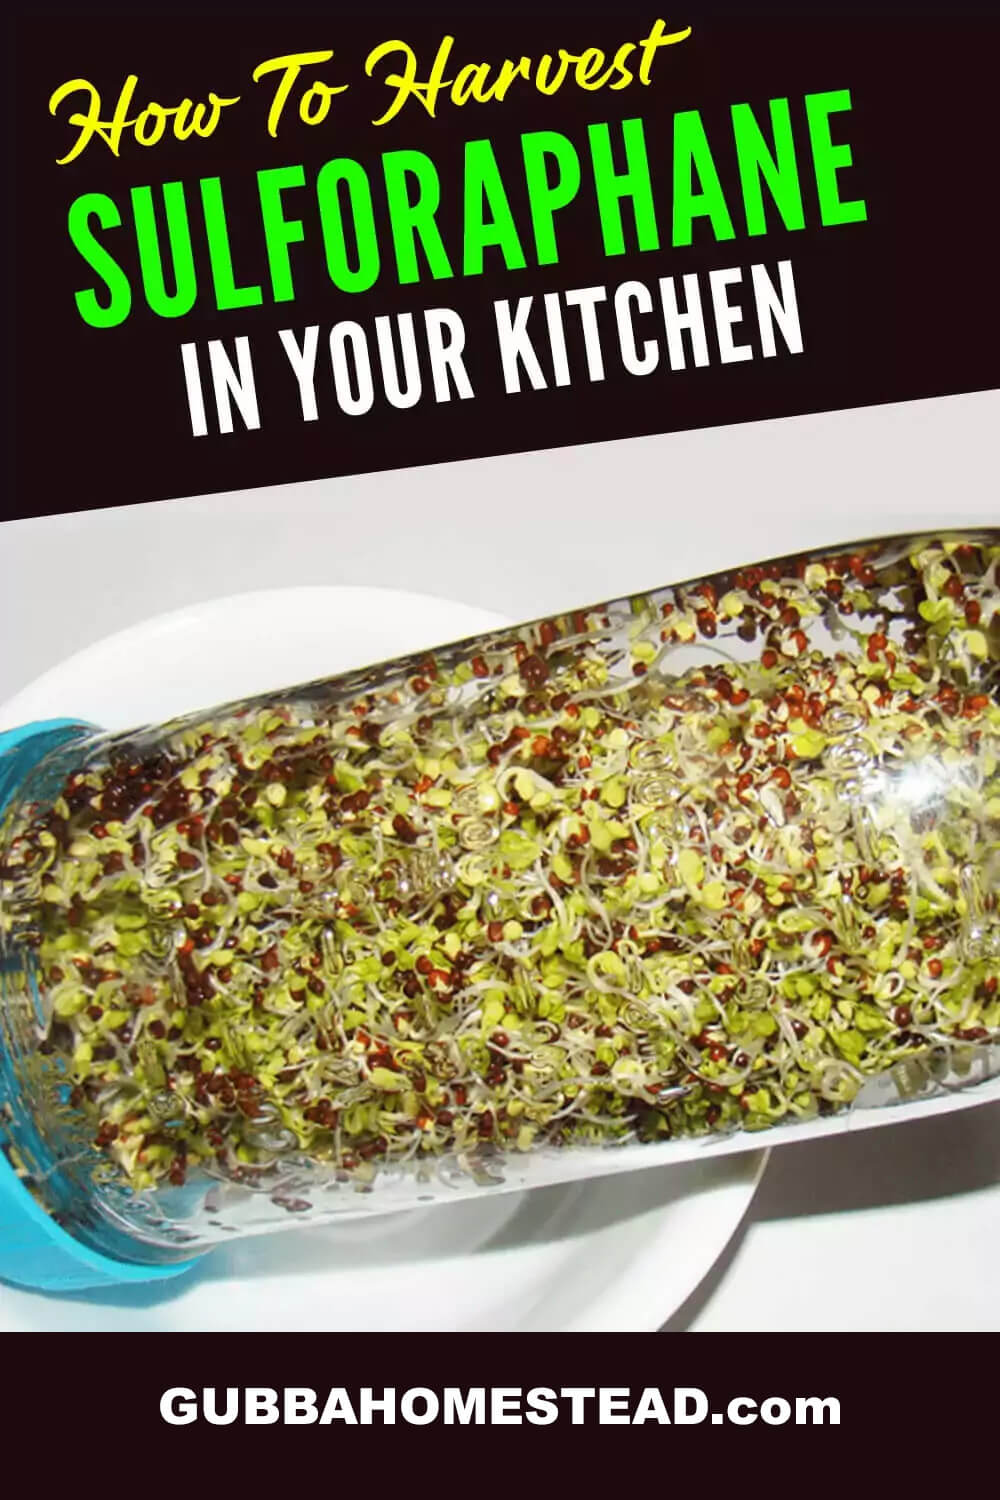 How To Harvest Sulforaphane In Your Kitchen